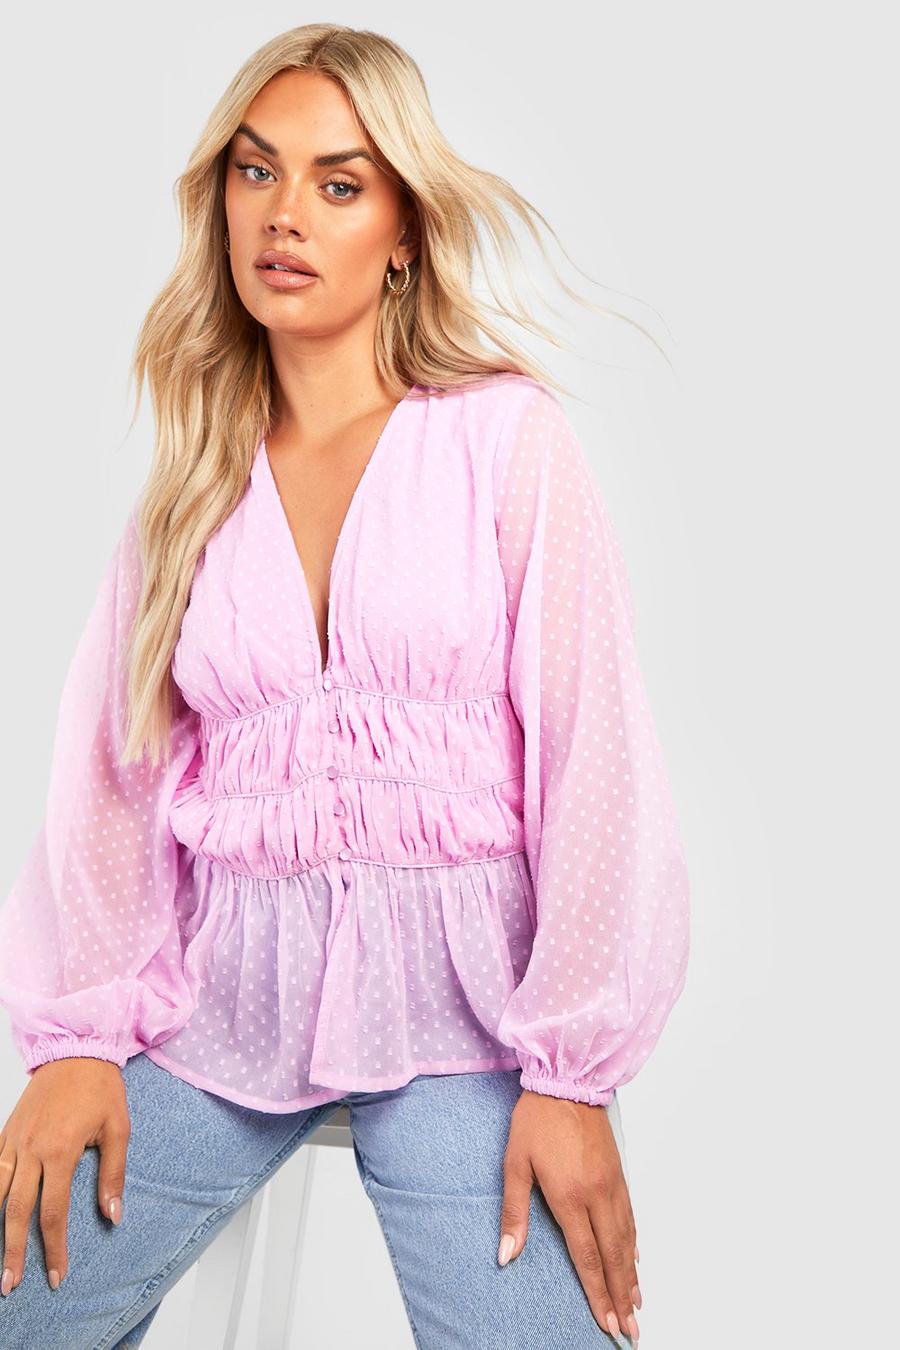 Blusa Plus Size in rete plumetis con ruches, Bright lilac image number 1